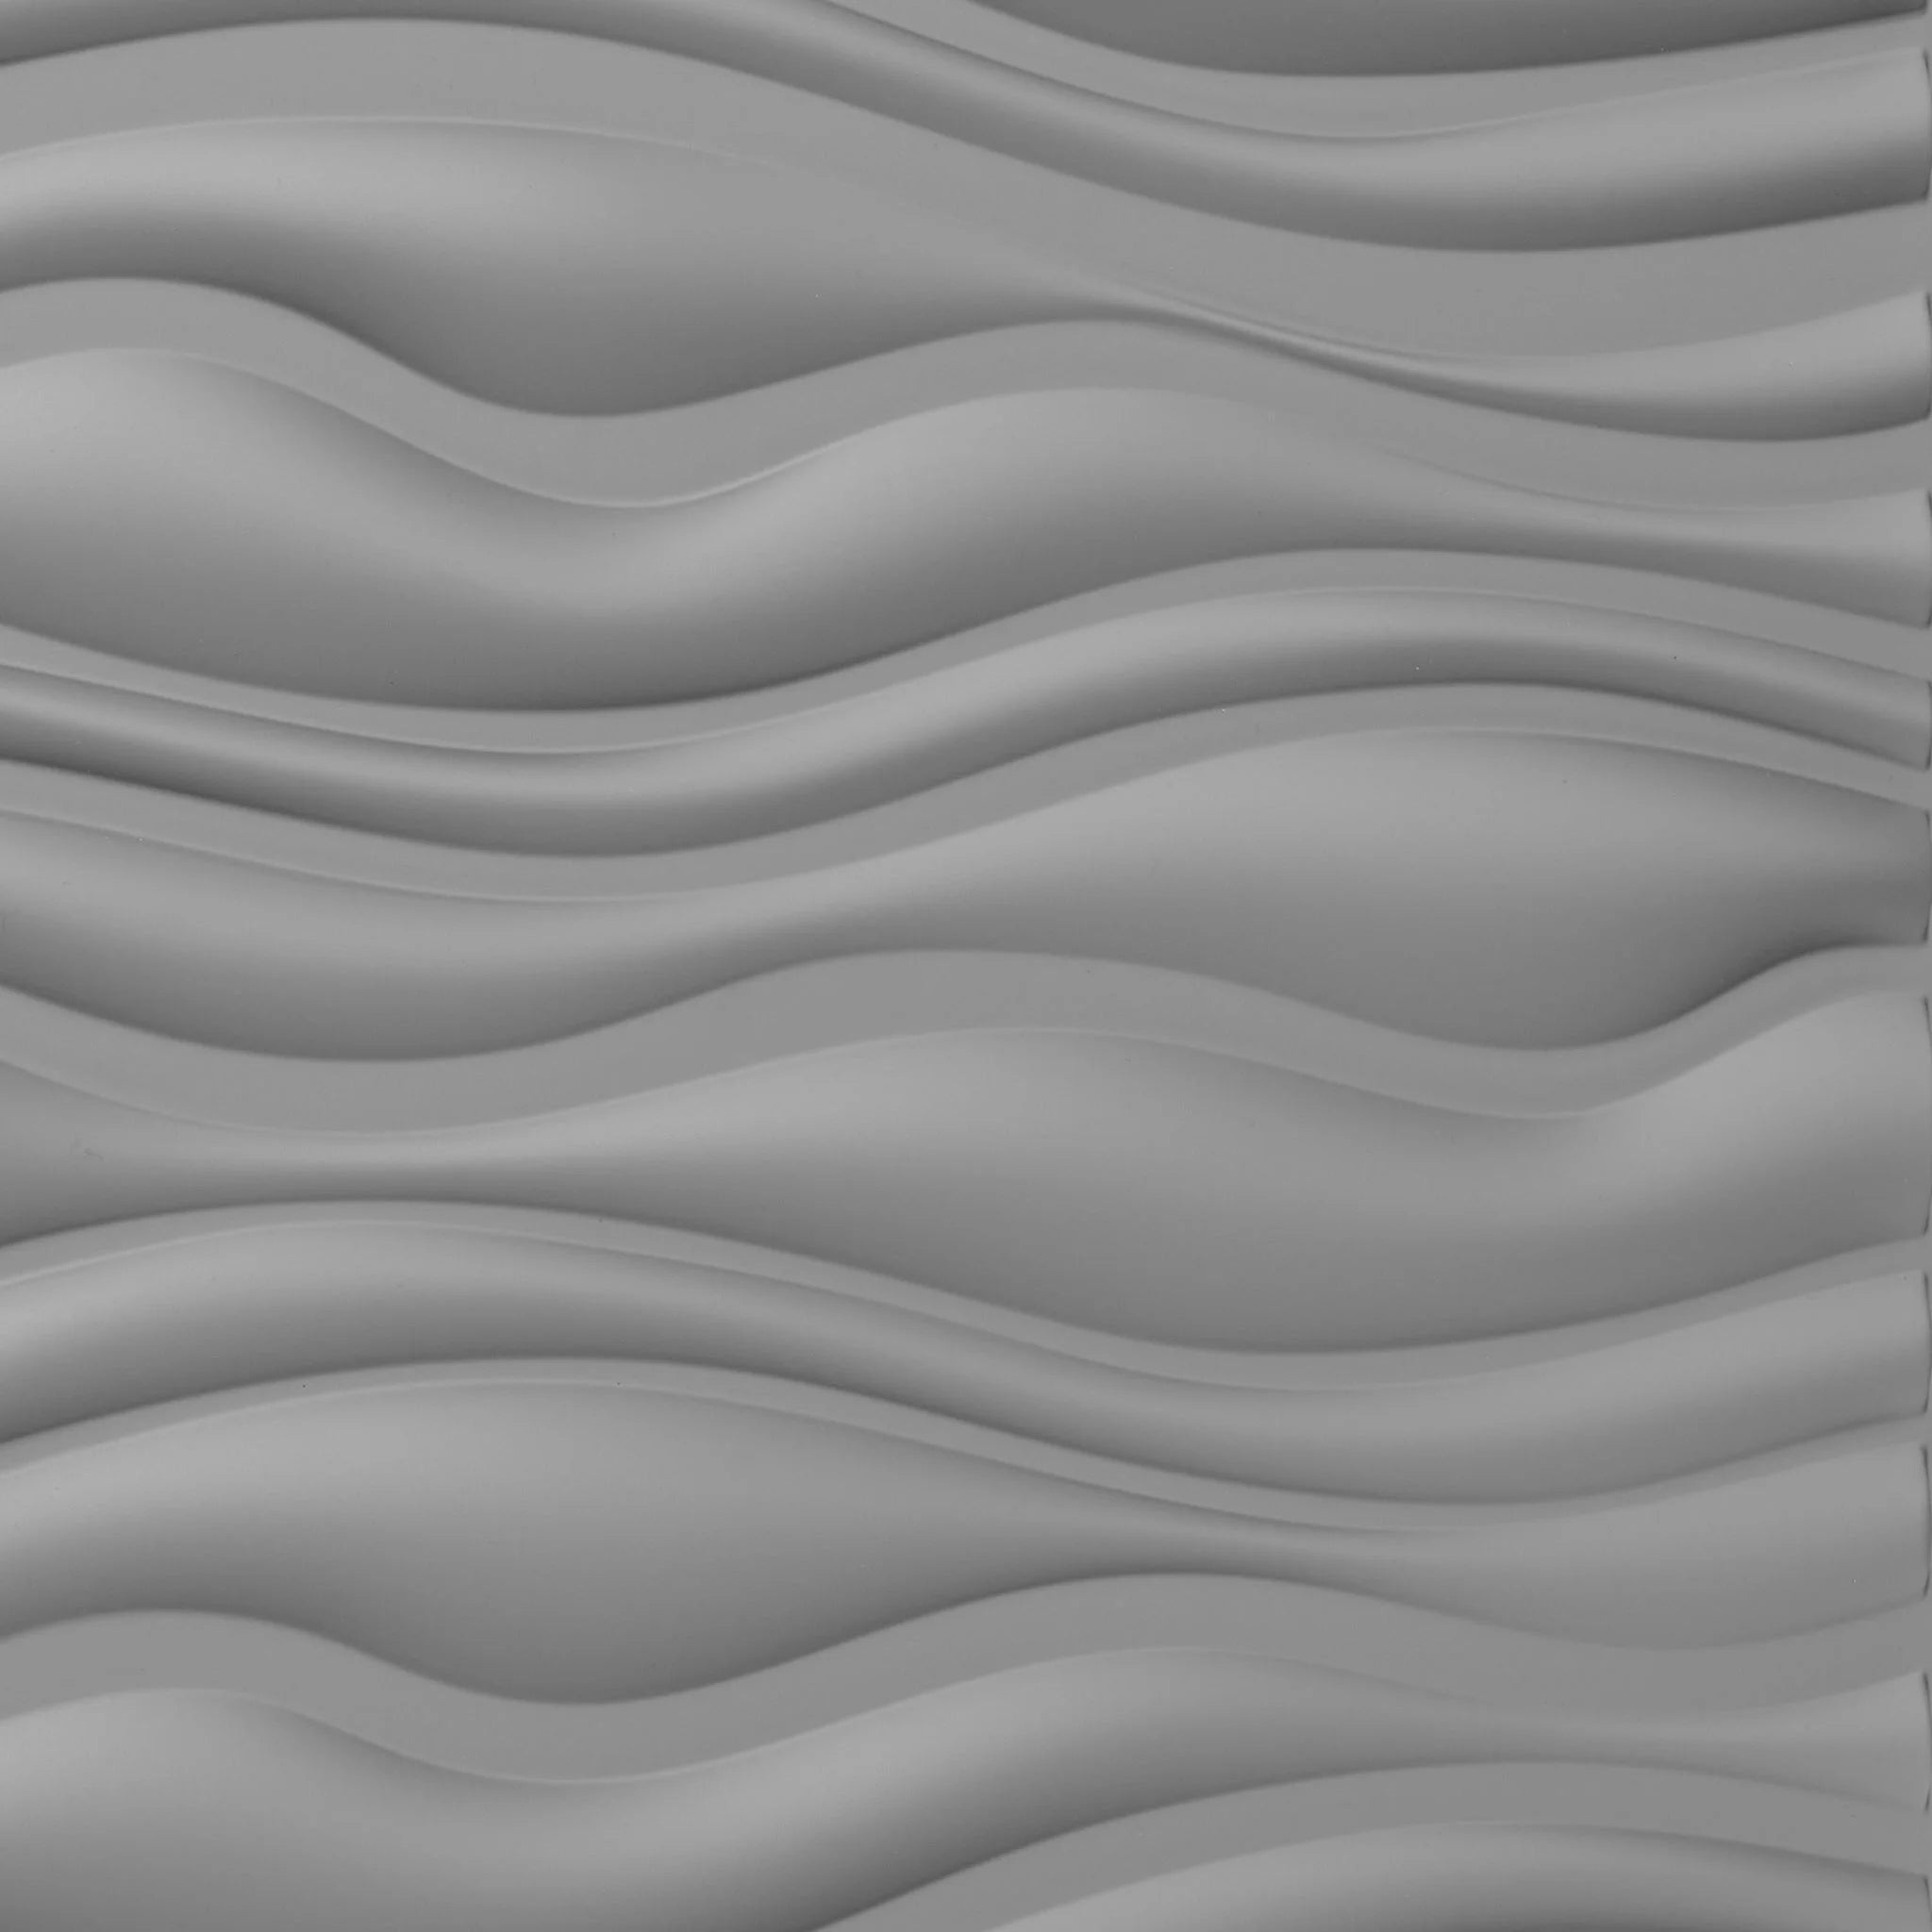 Close-up of silver PVC wall panel with wavy designs